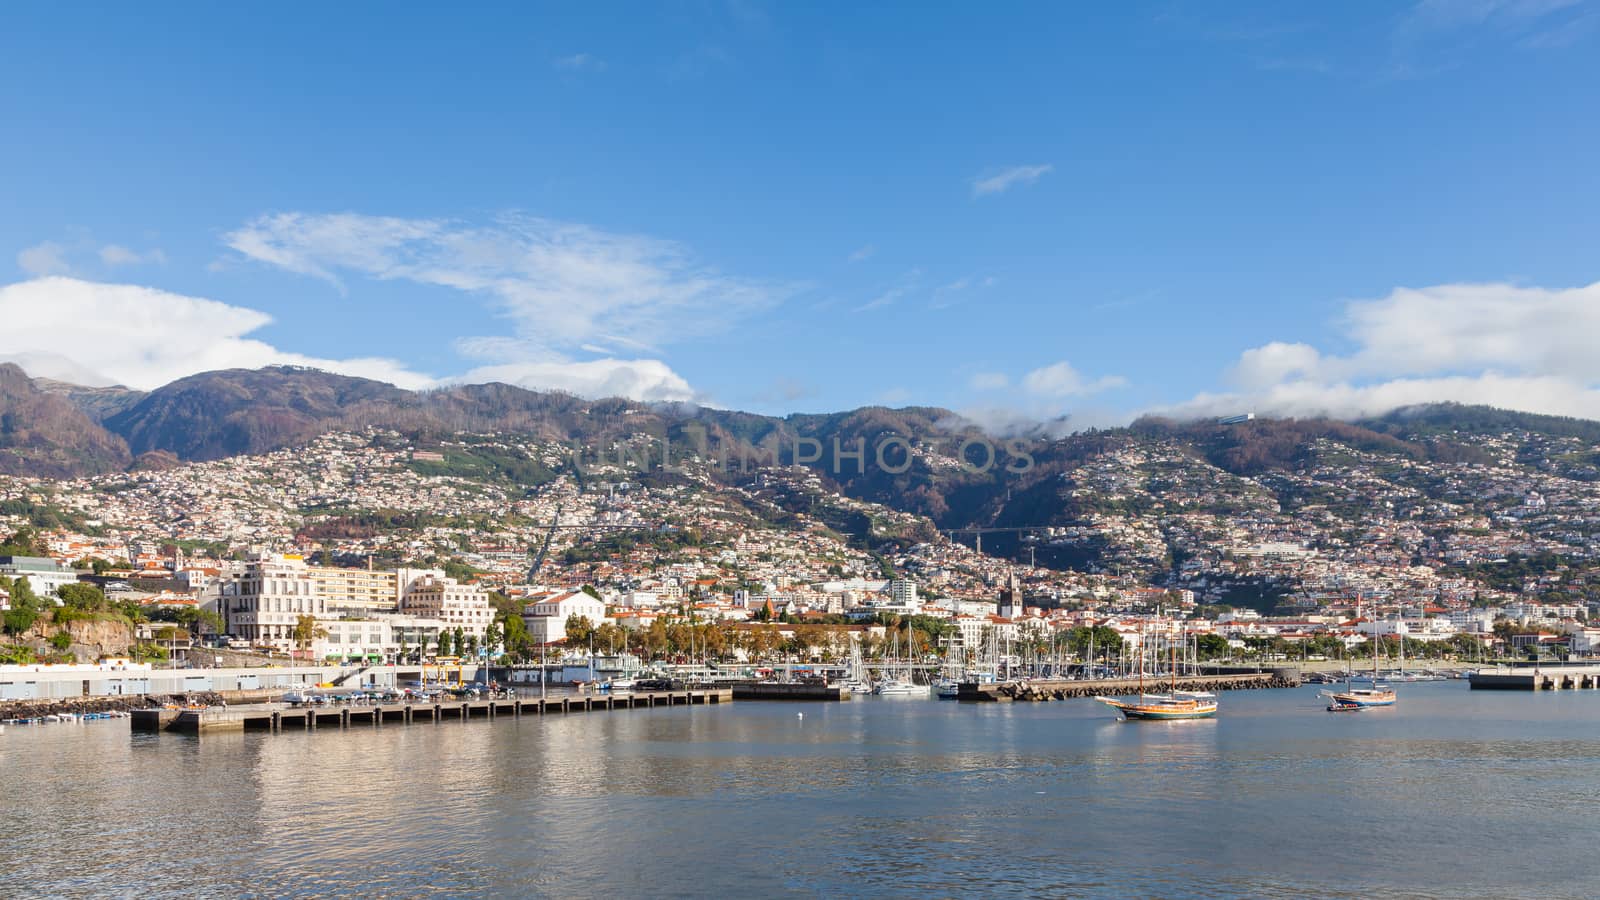 The waterfront of Funchal on the Portuguese island of Madeira.